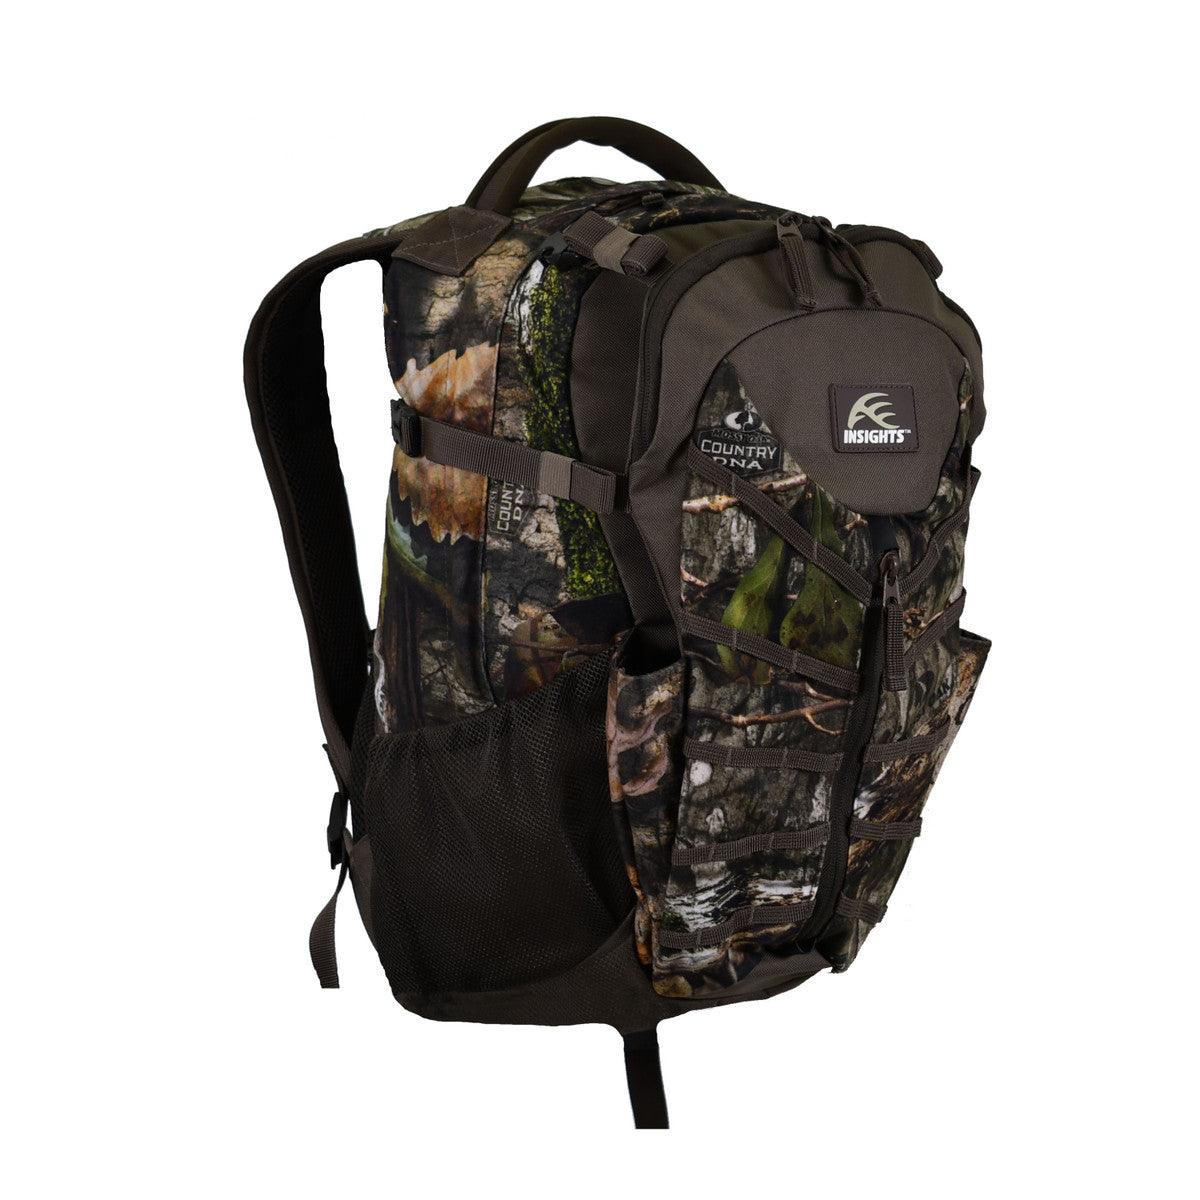 Frogg Toggs Drifter Lightweight Pack - Leapfrog Outdoor Sports and Apparel